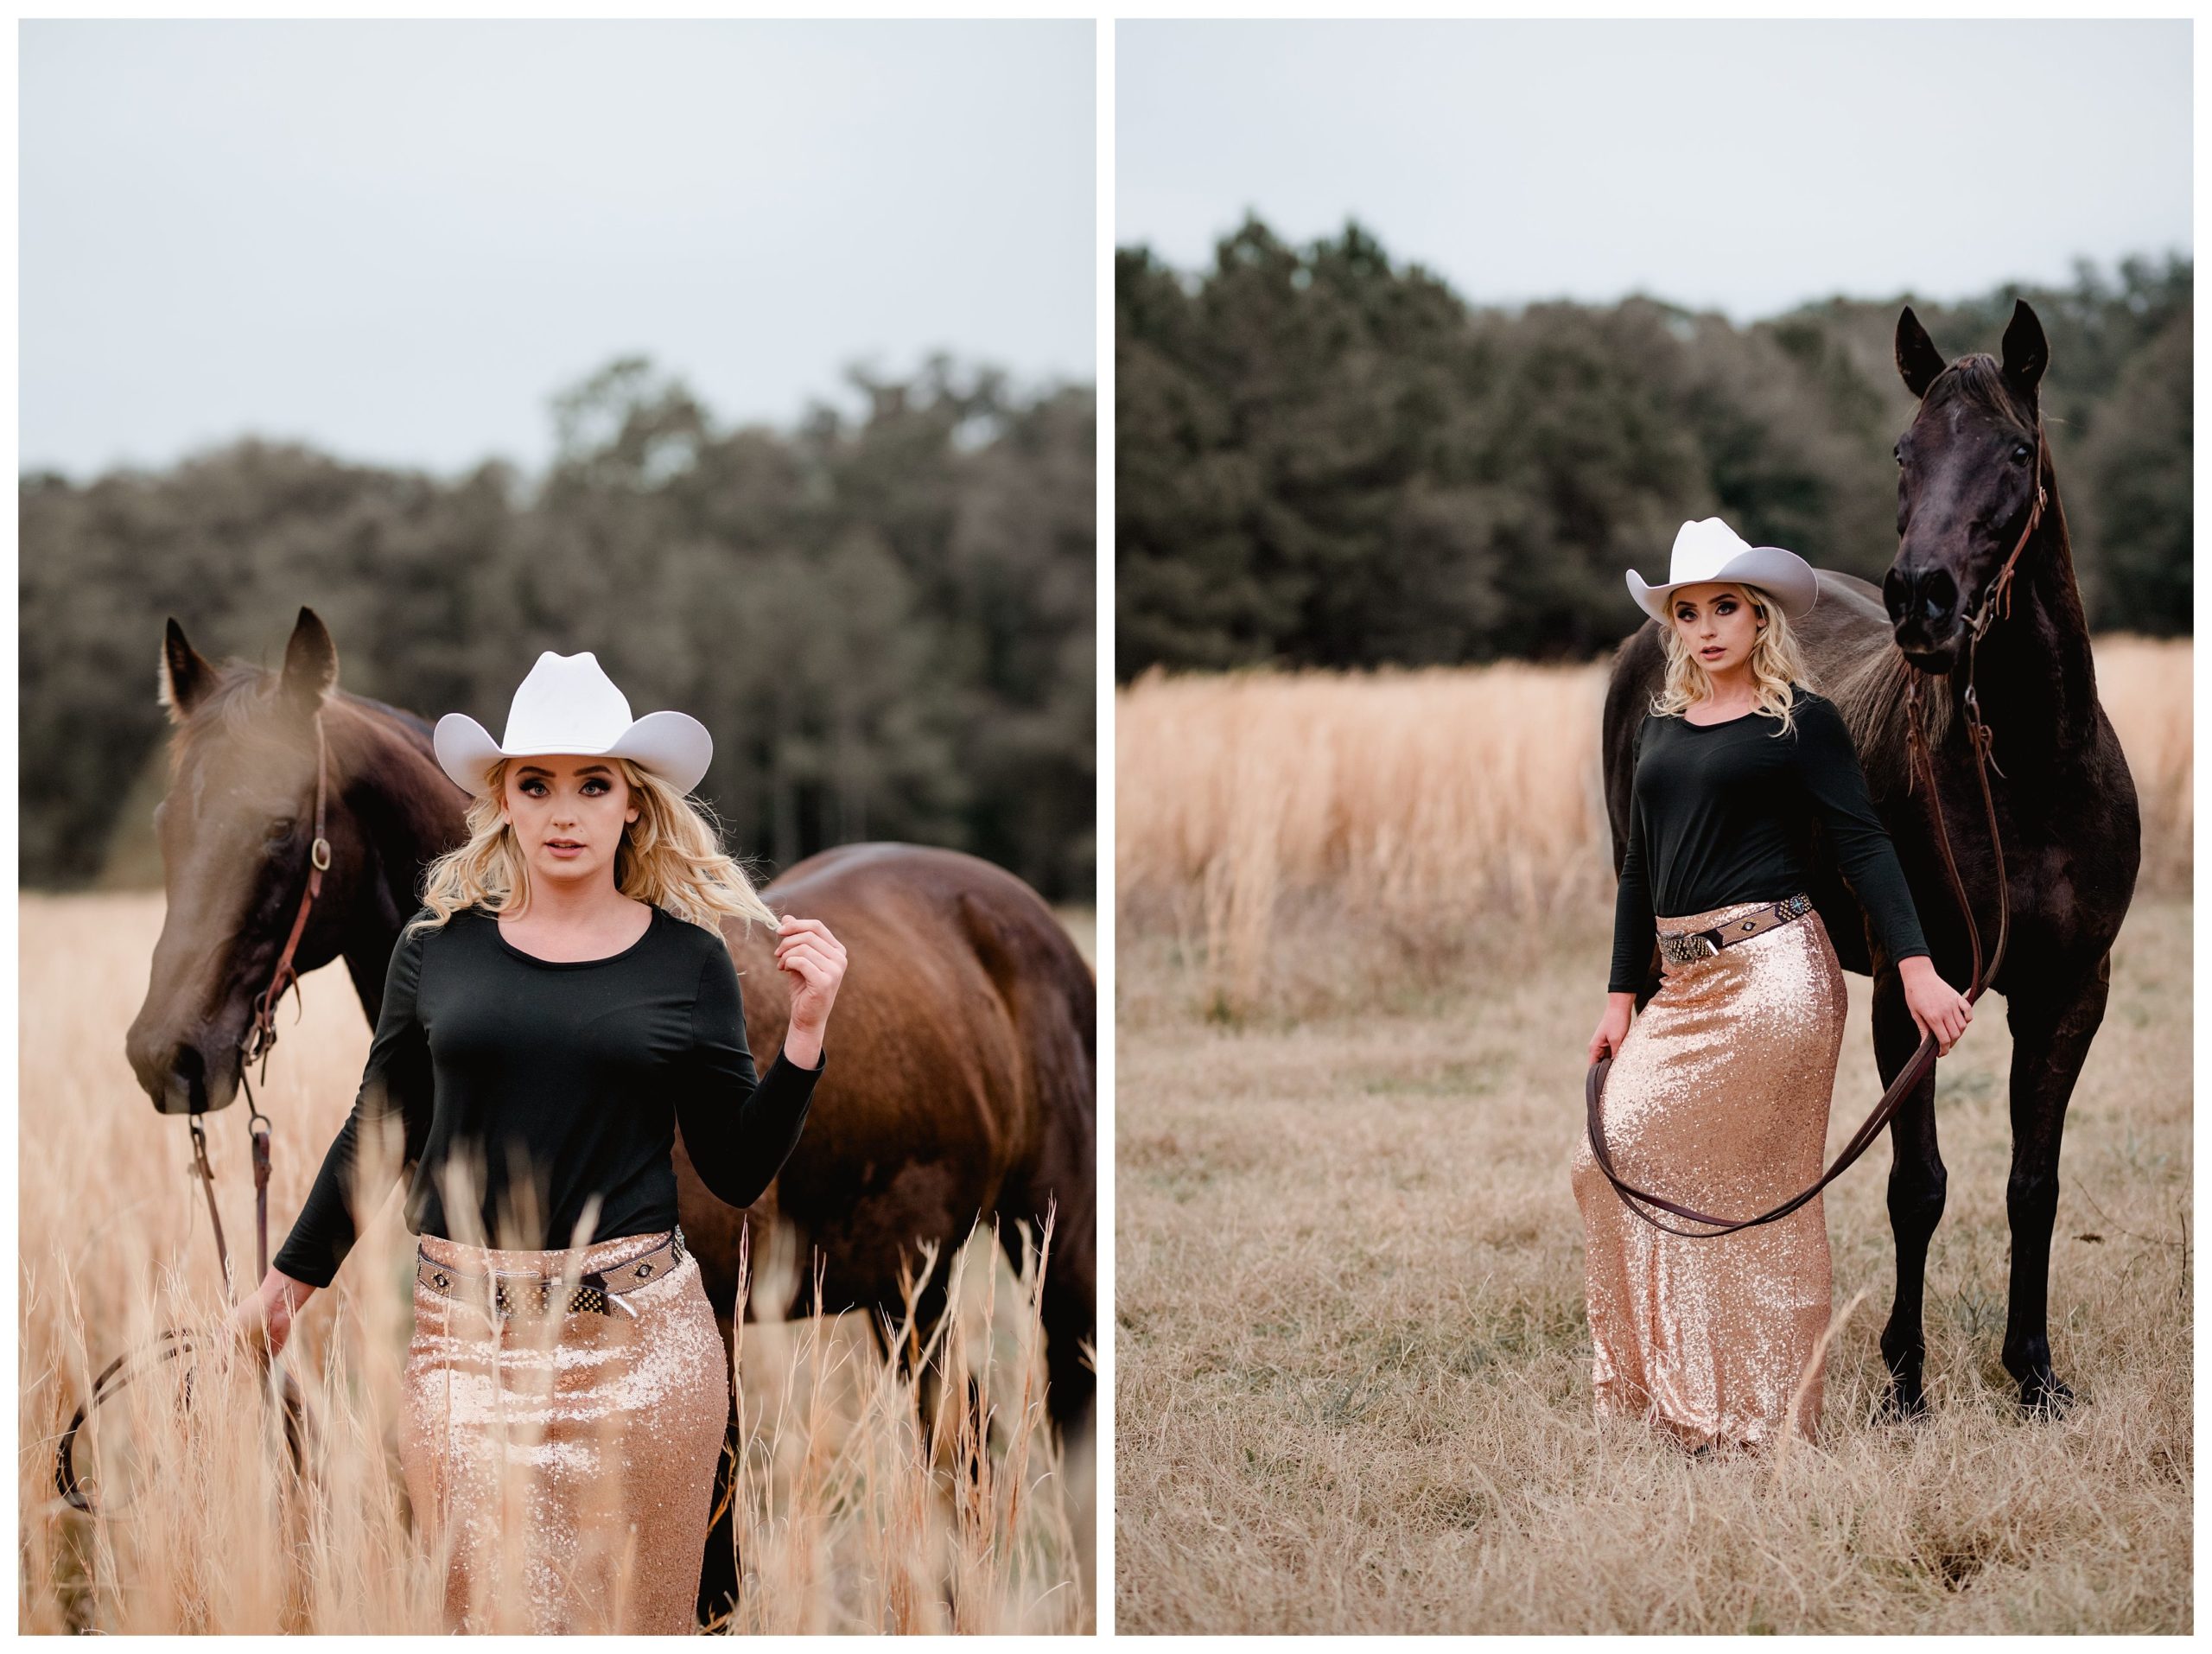 Western cowgirl models with horse for professional pictures with equine photographer.